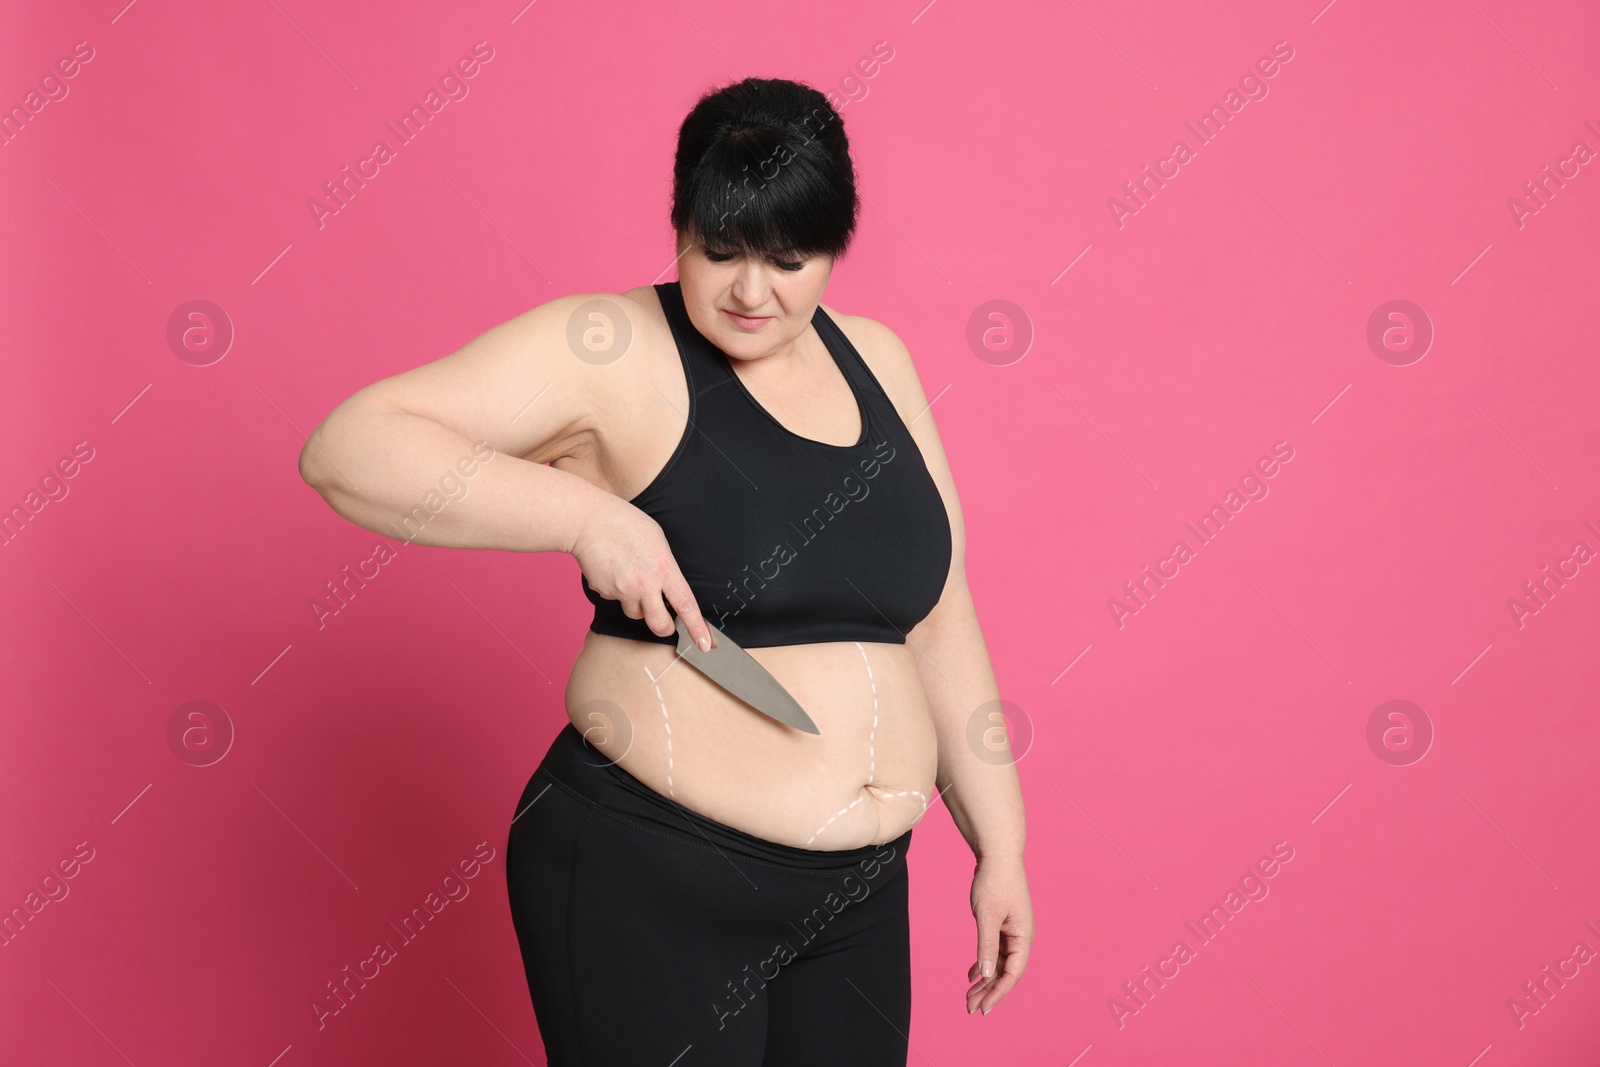 Photo of Obese woman with knife and marks on body against pink background. Weight loss surgery